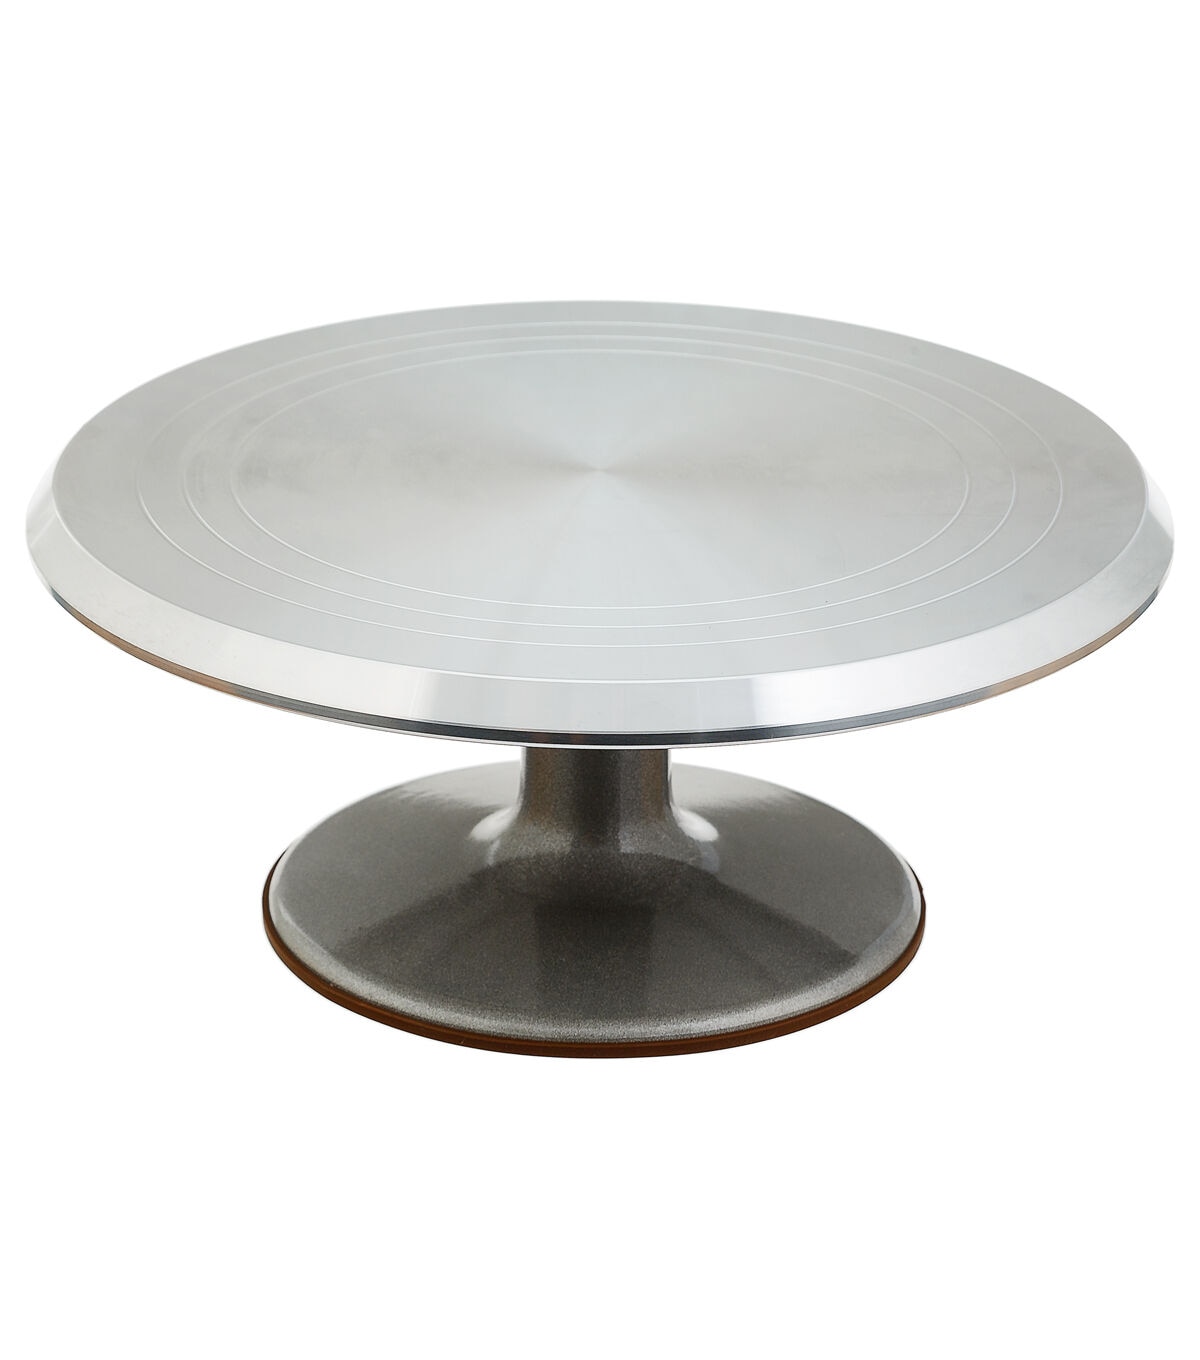 Stinson Handcasted Aluminum Cake Stand | Pottery Barn